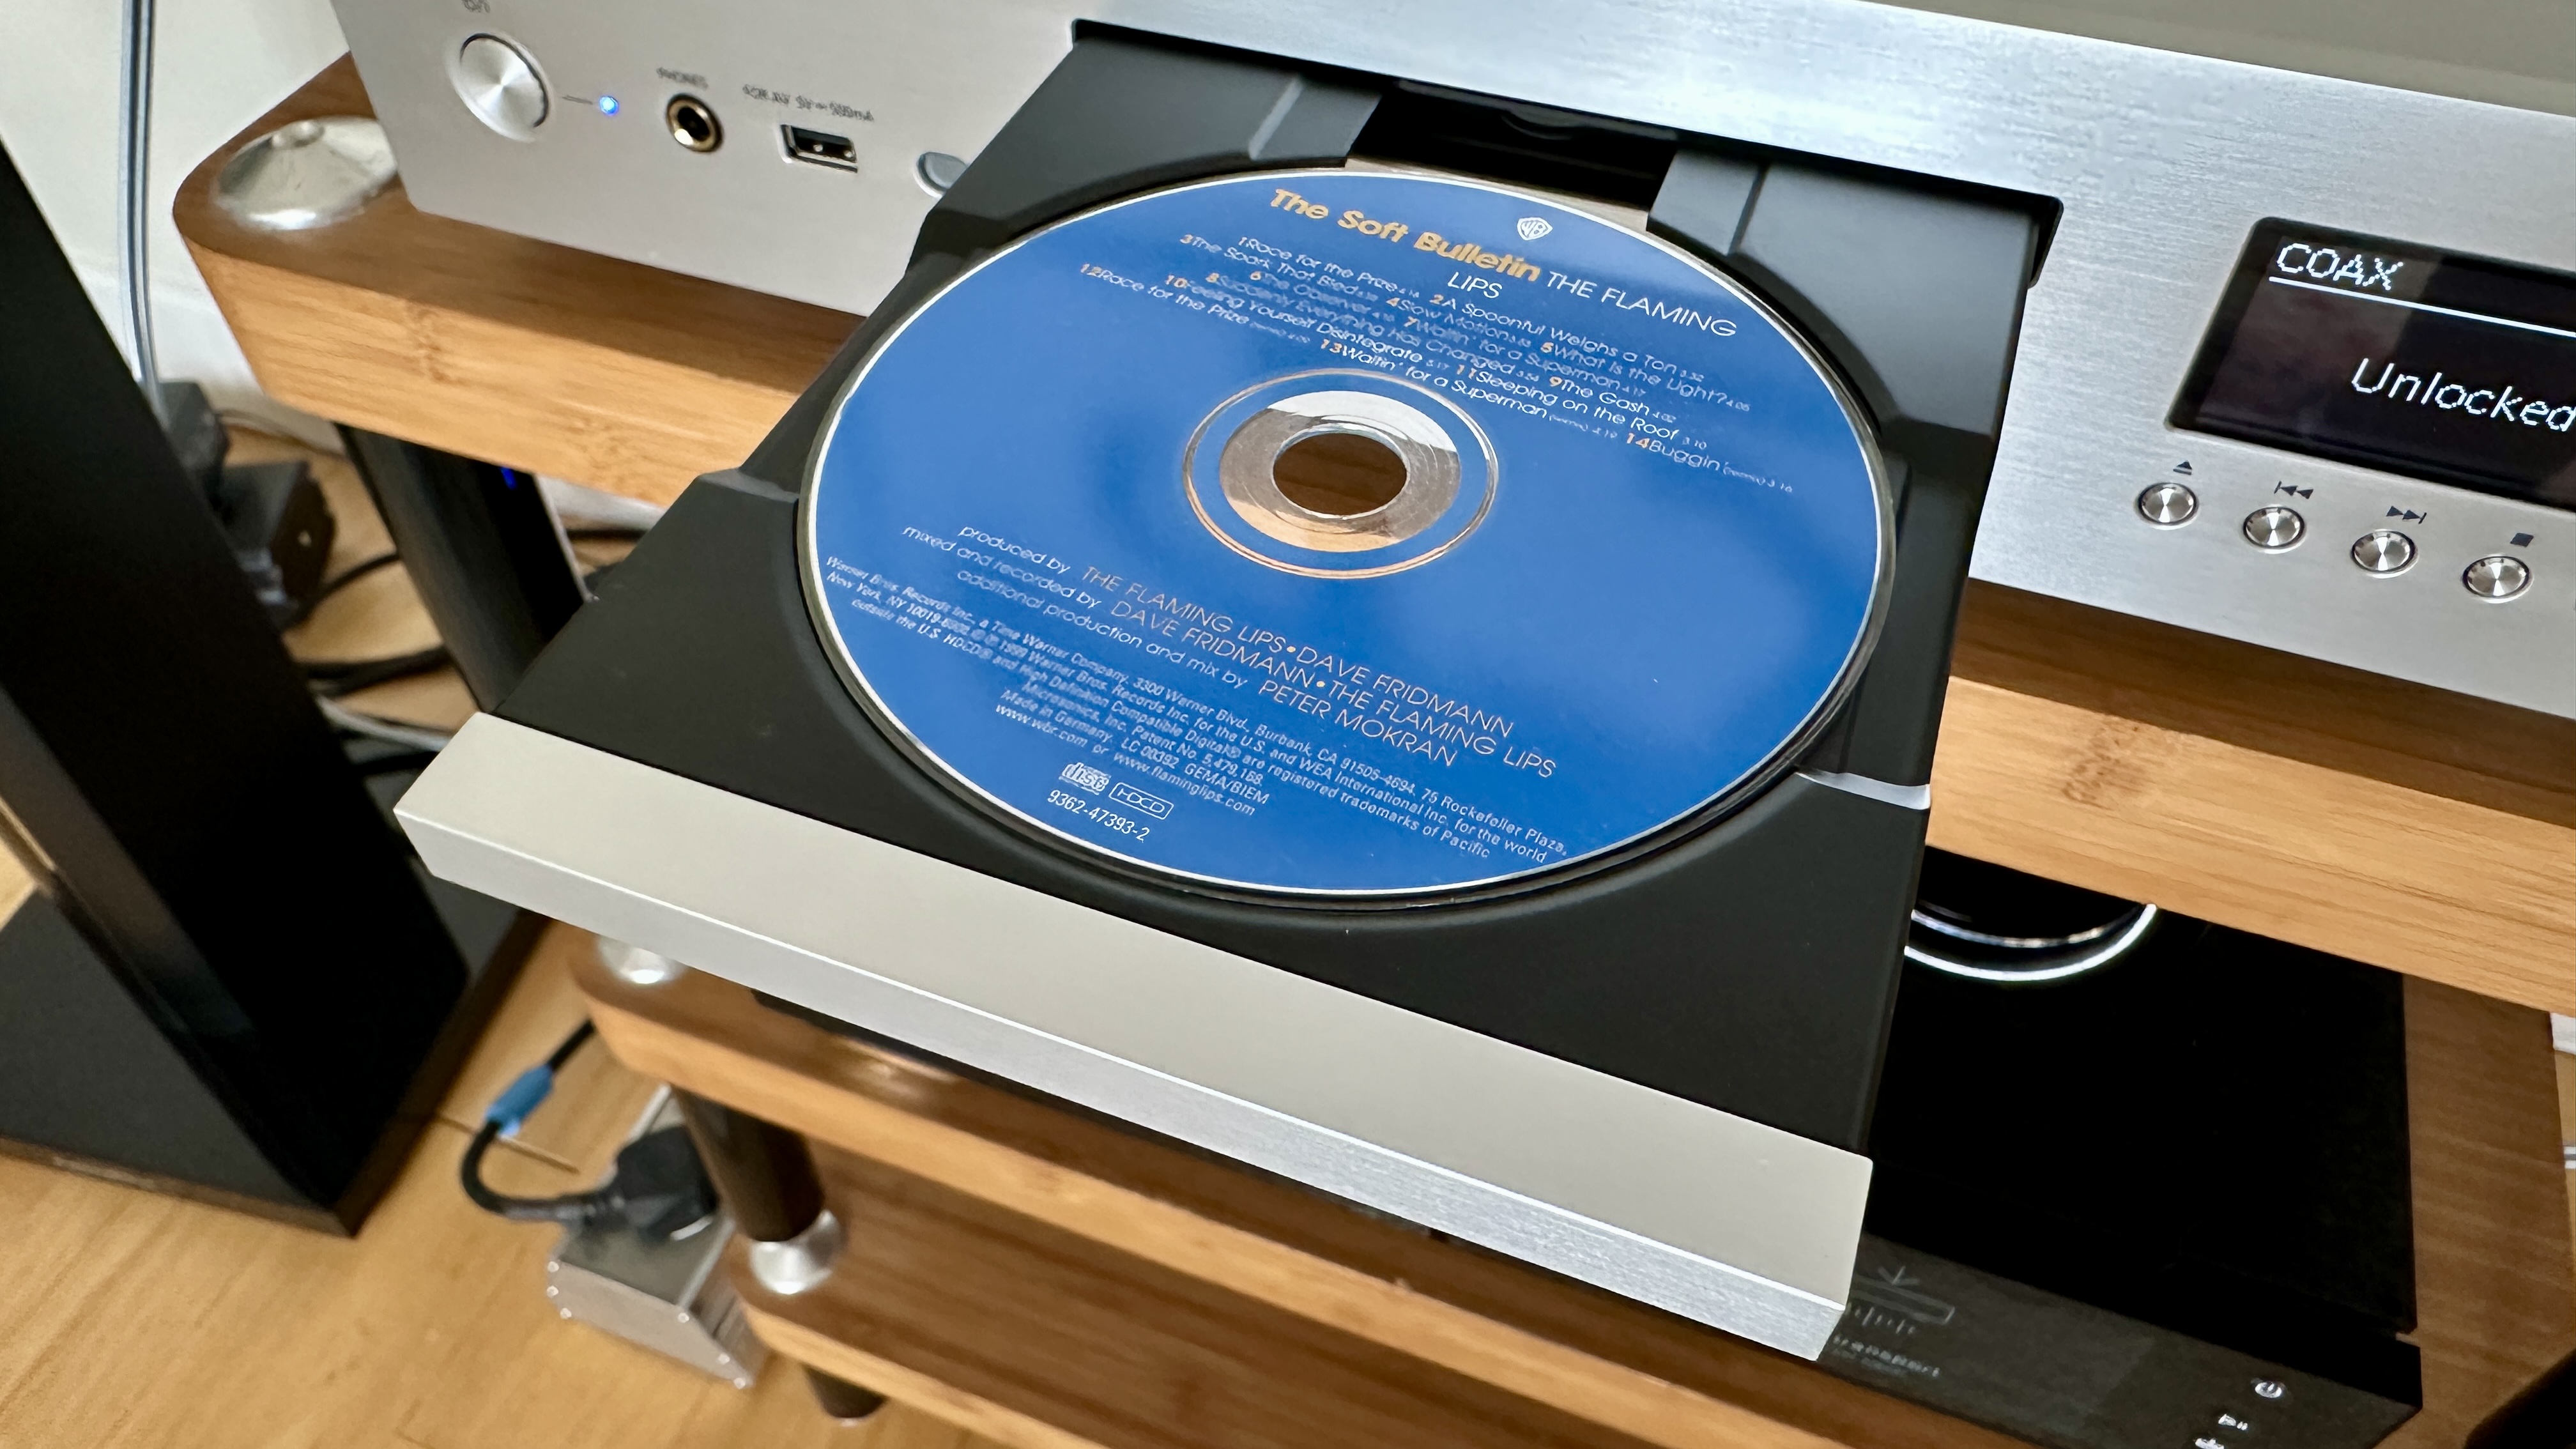 An HDCD being loaded into the Technics SL-G700M2, in a hi-fi listening room